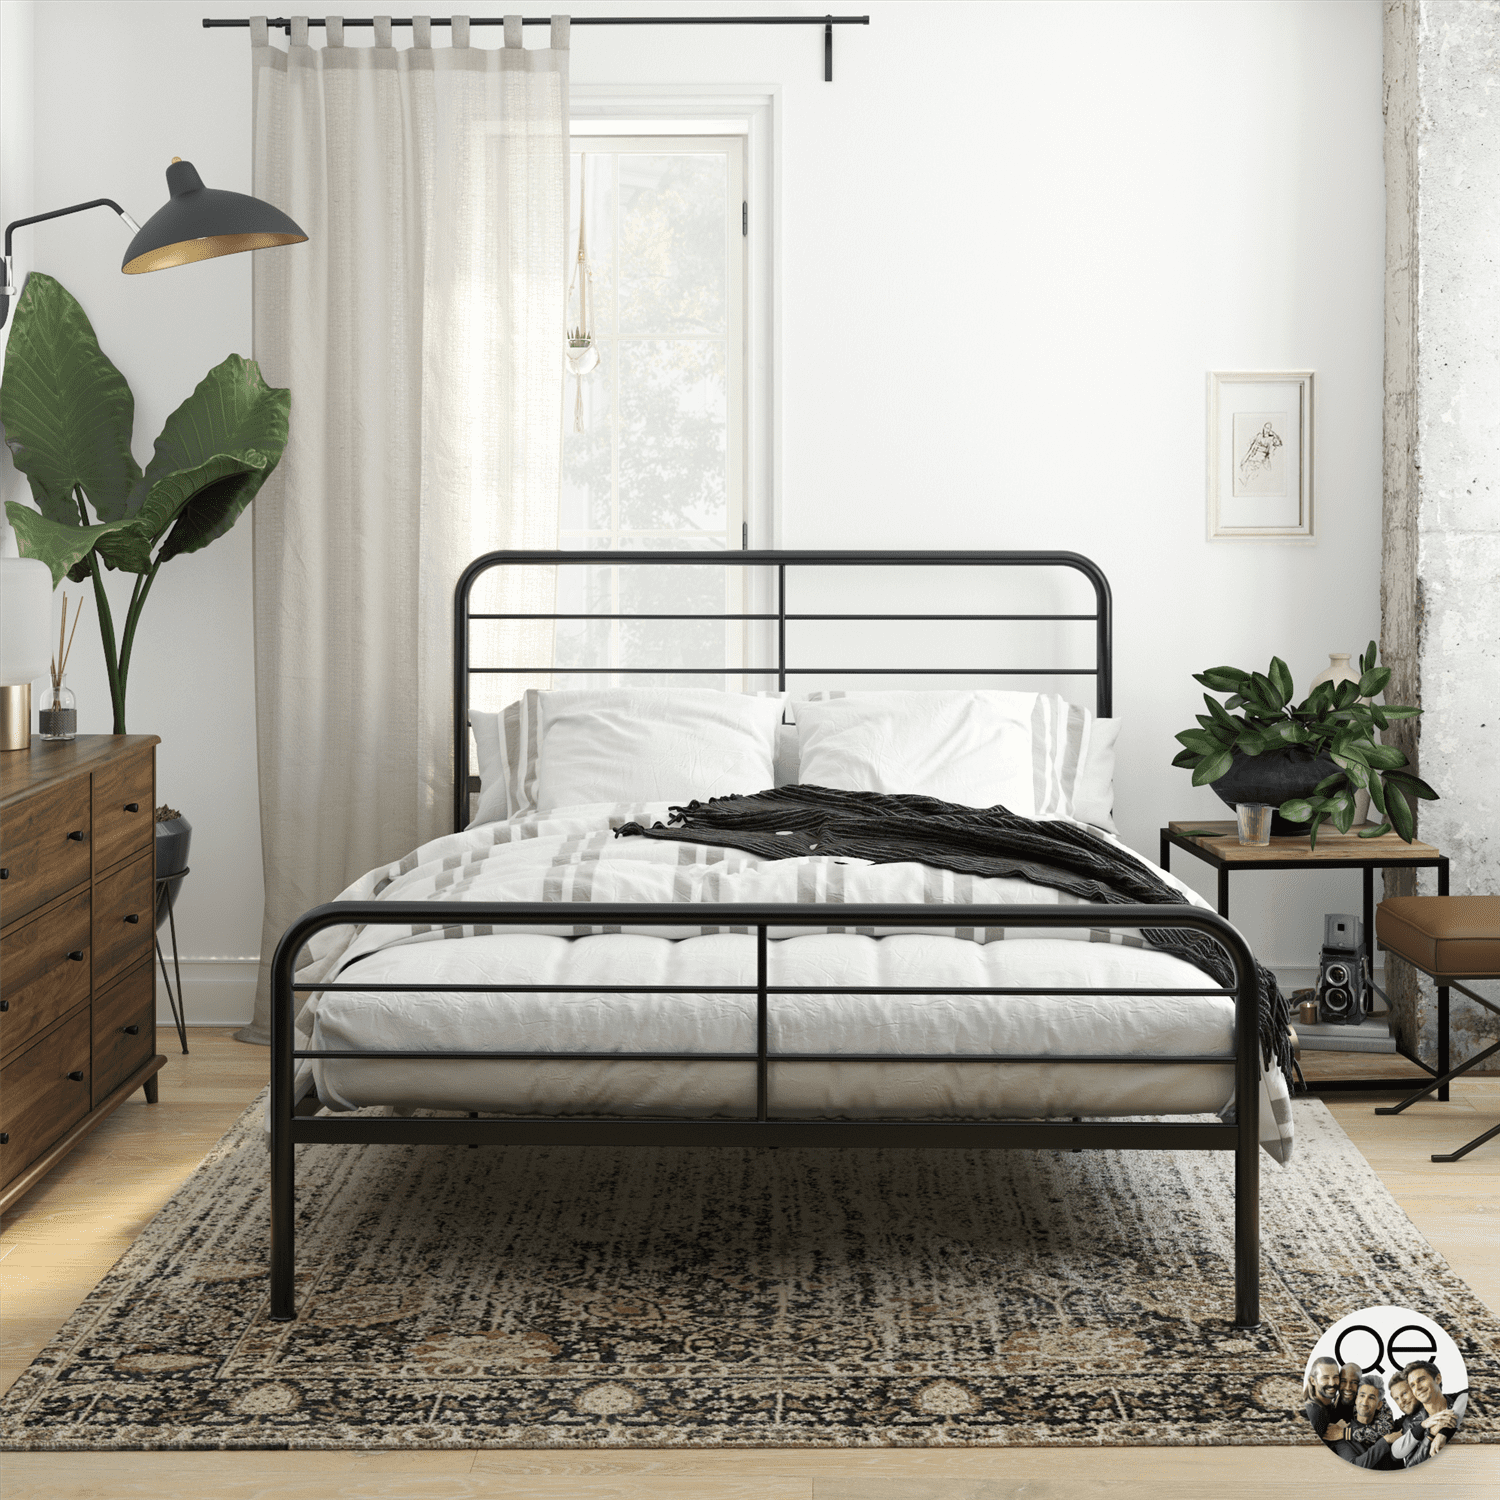 Eye Millie Metal Bed With, Black Headboard For Queen Size Bed